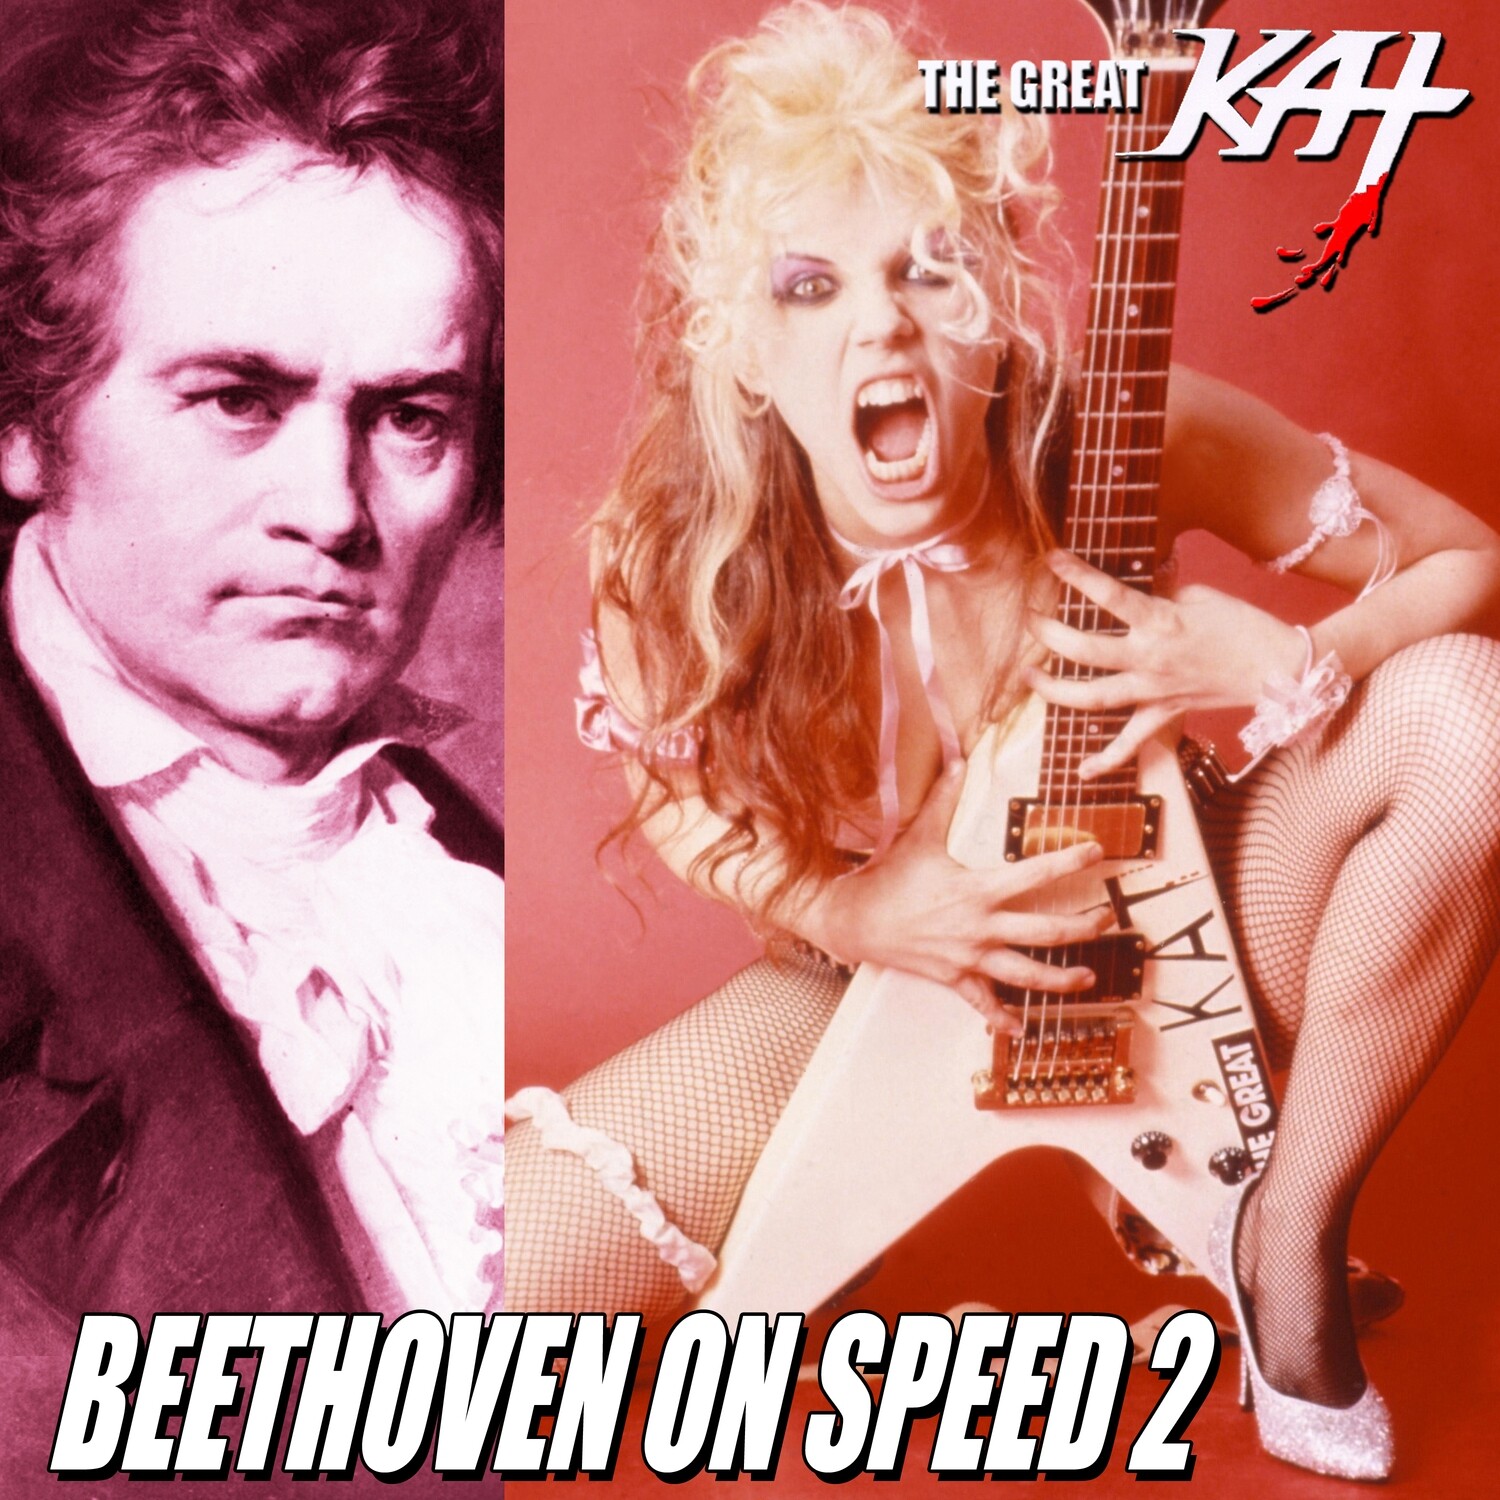 NEW “BEETHOVEN ON SPEED 2” 8-Song CD Album (12 Min) by THE GREAT KAT! PERSONALIZED AUTOGRAPHED by THE GREAT KAT to Customer! With Beethoven On Speed 2, Sex &amp; Violins 2, Bach To The Future 2 &amp; more!